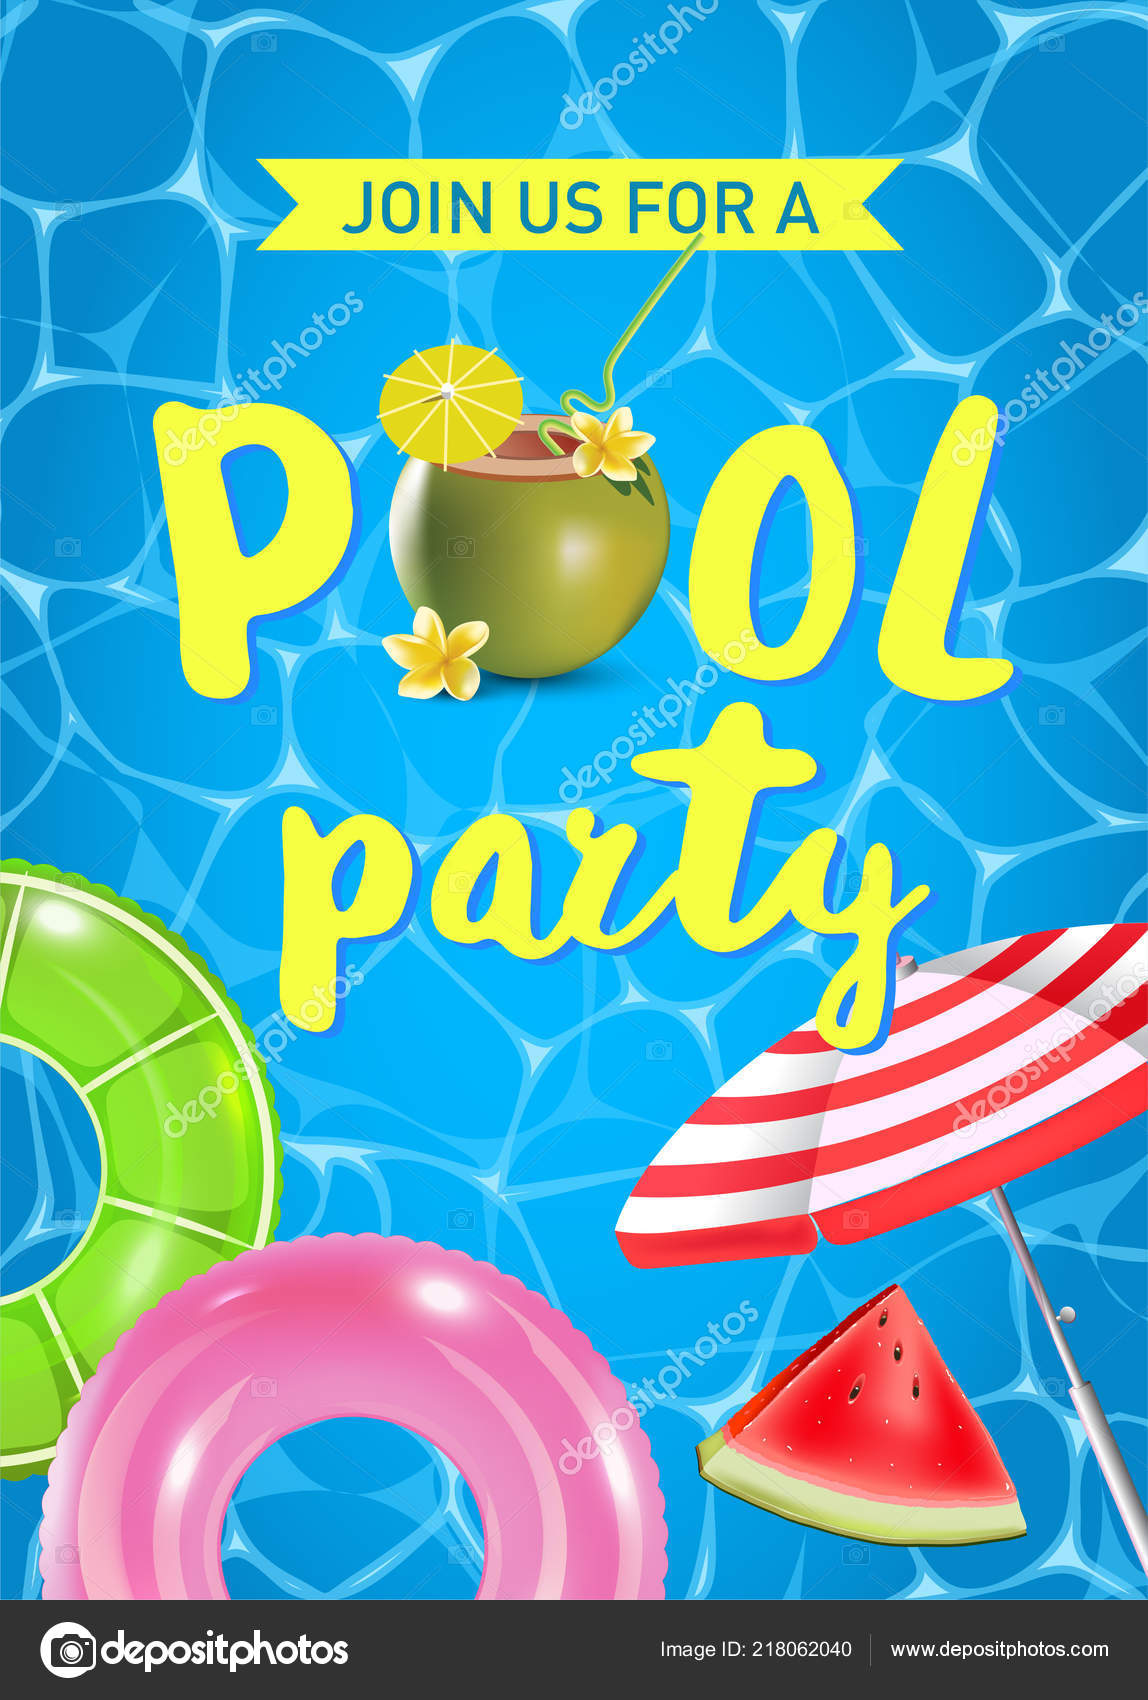 Pool party invitation vector illustration. Top view of swimming pool